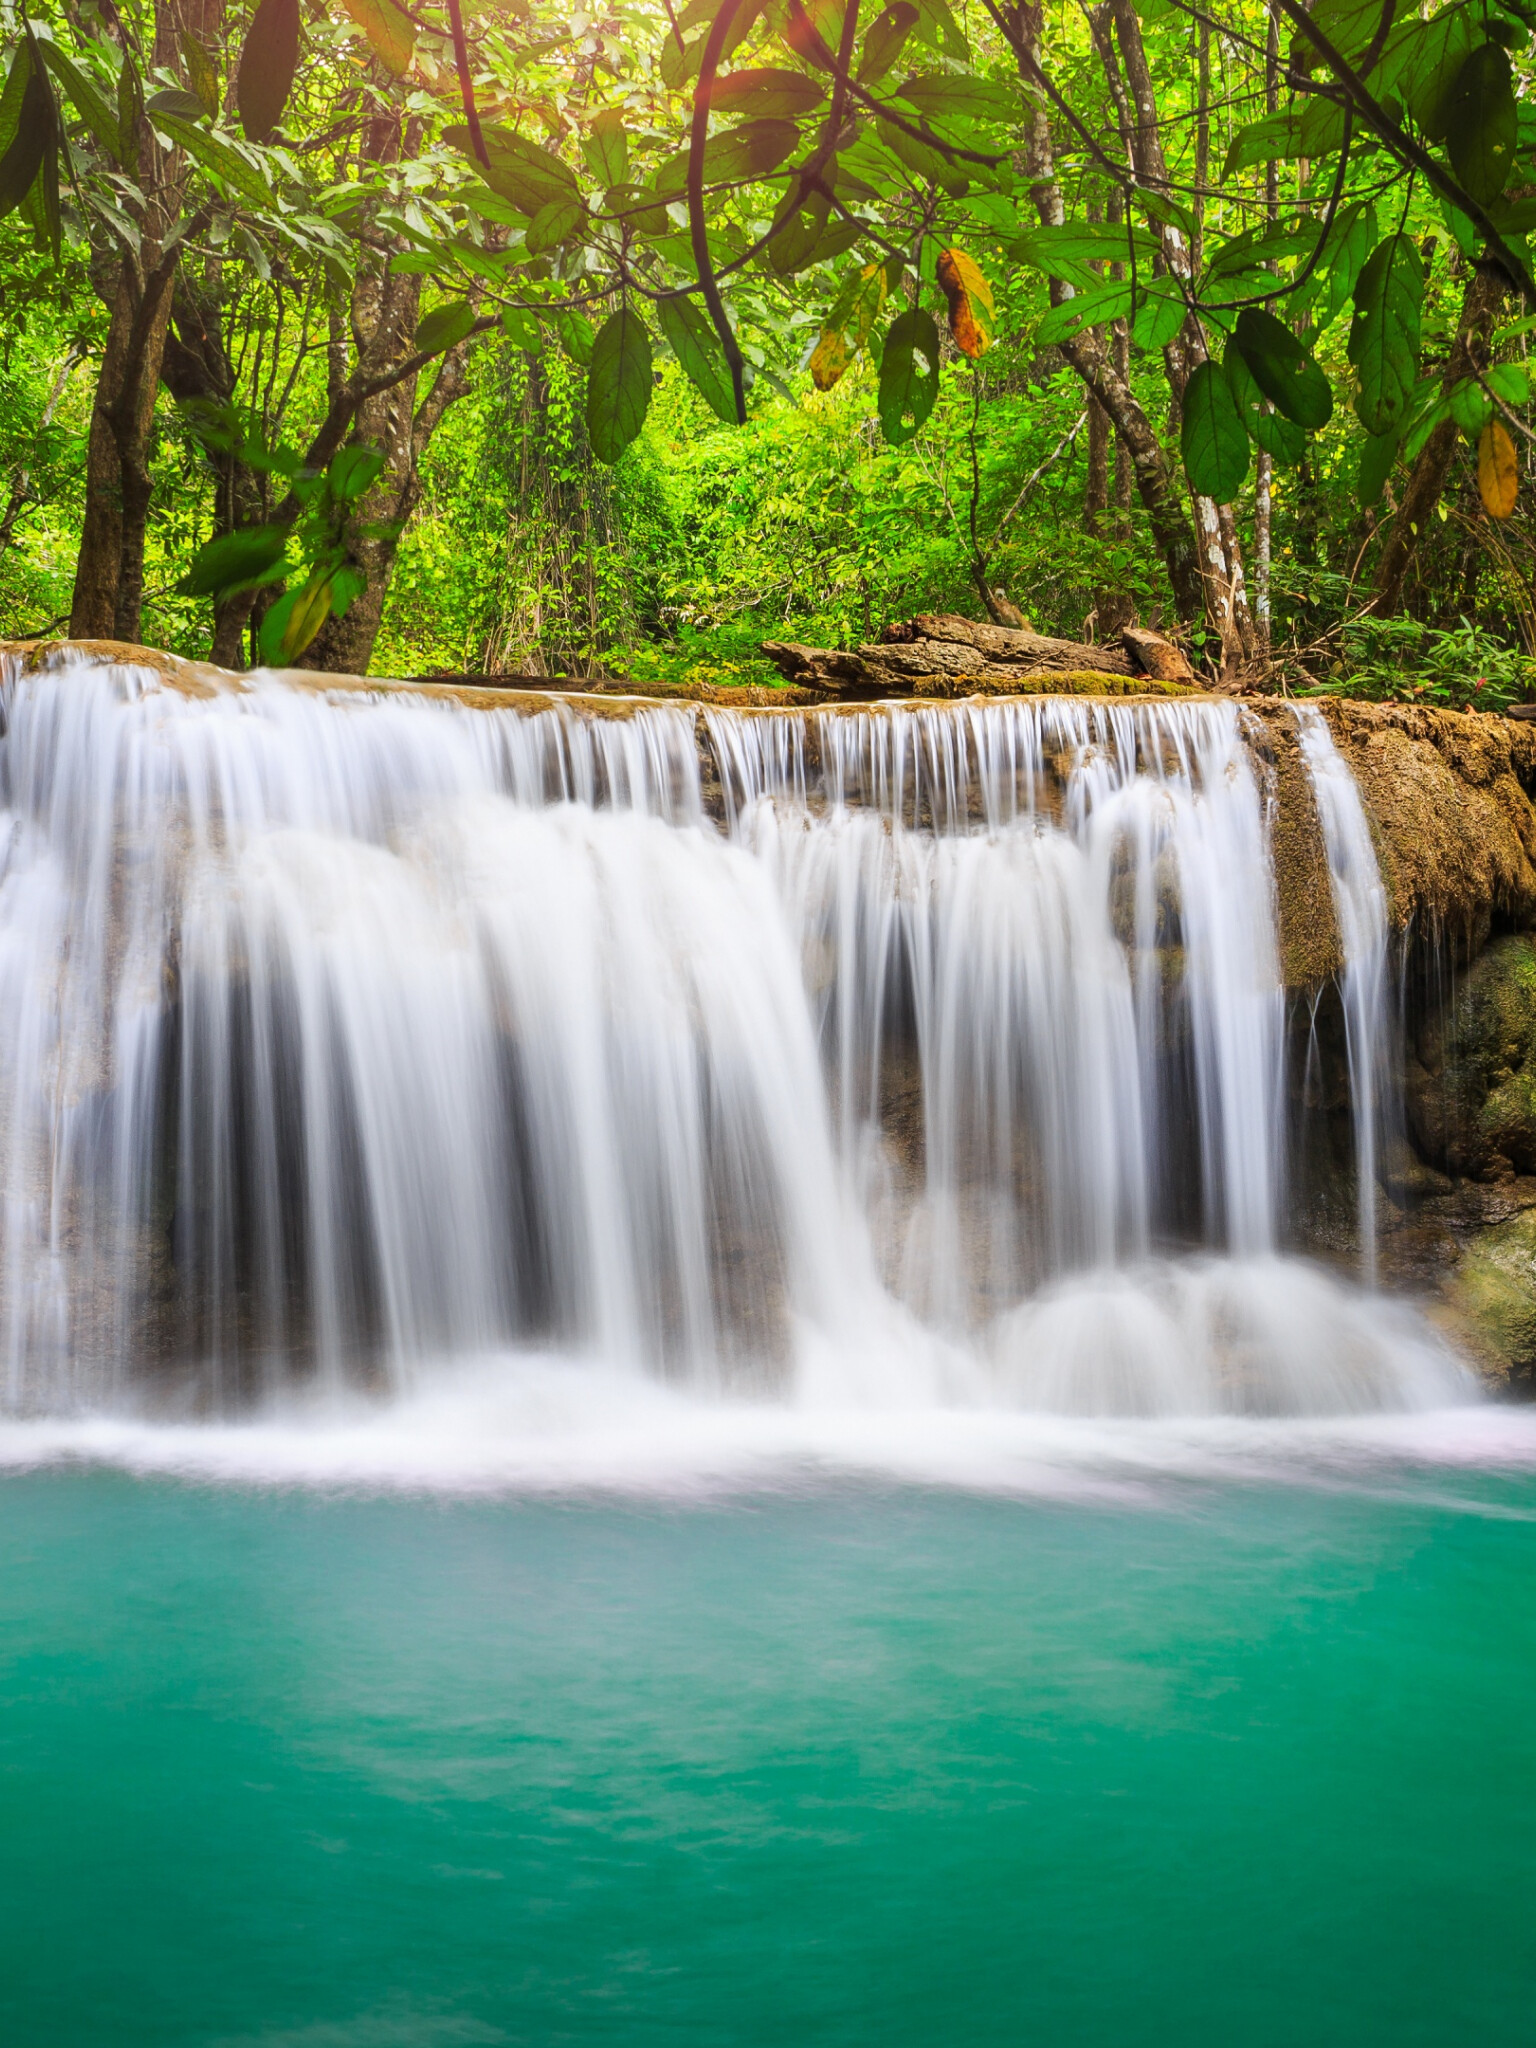 Waterfall: Rainforest, The fall of stream from the ledge that crosses the river channel. 1540x2050 HD Wallpaper.